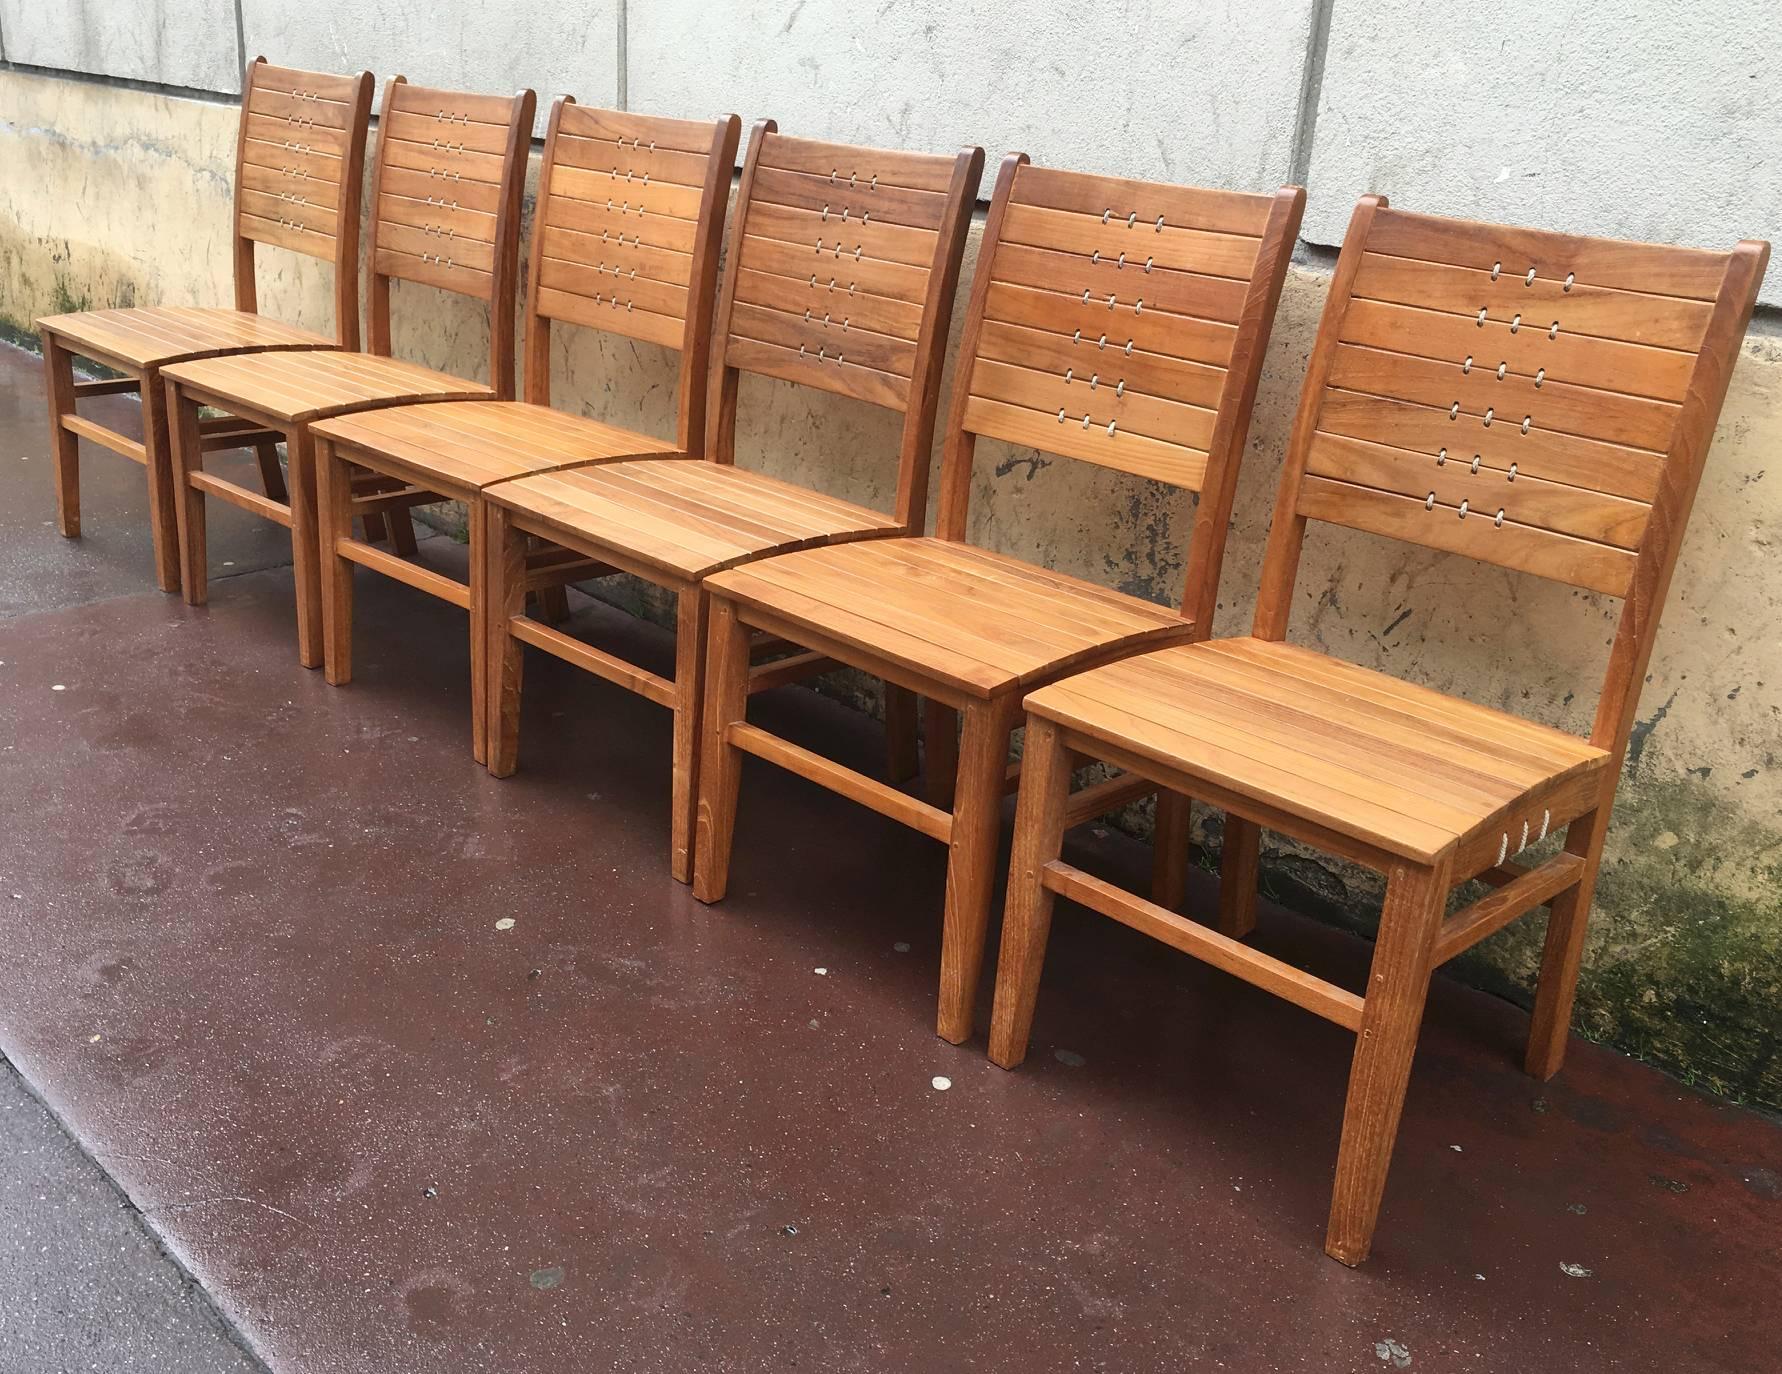 French Riviera Style set of six chairs in solid wood and rope woven wood back.